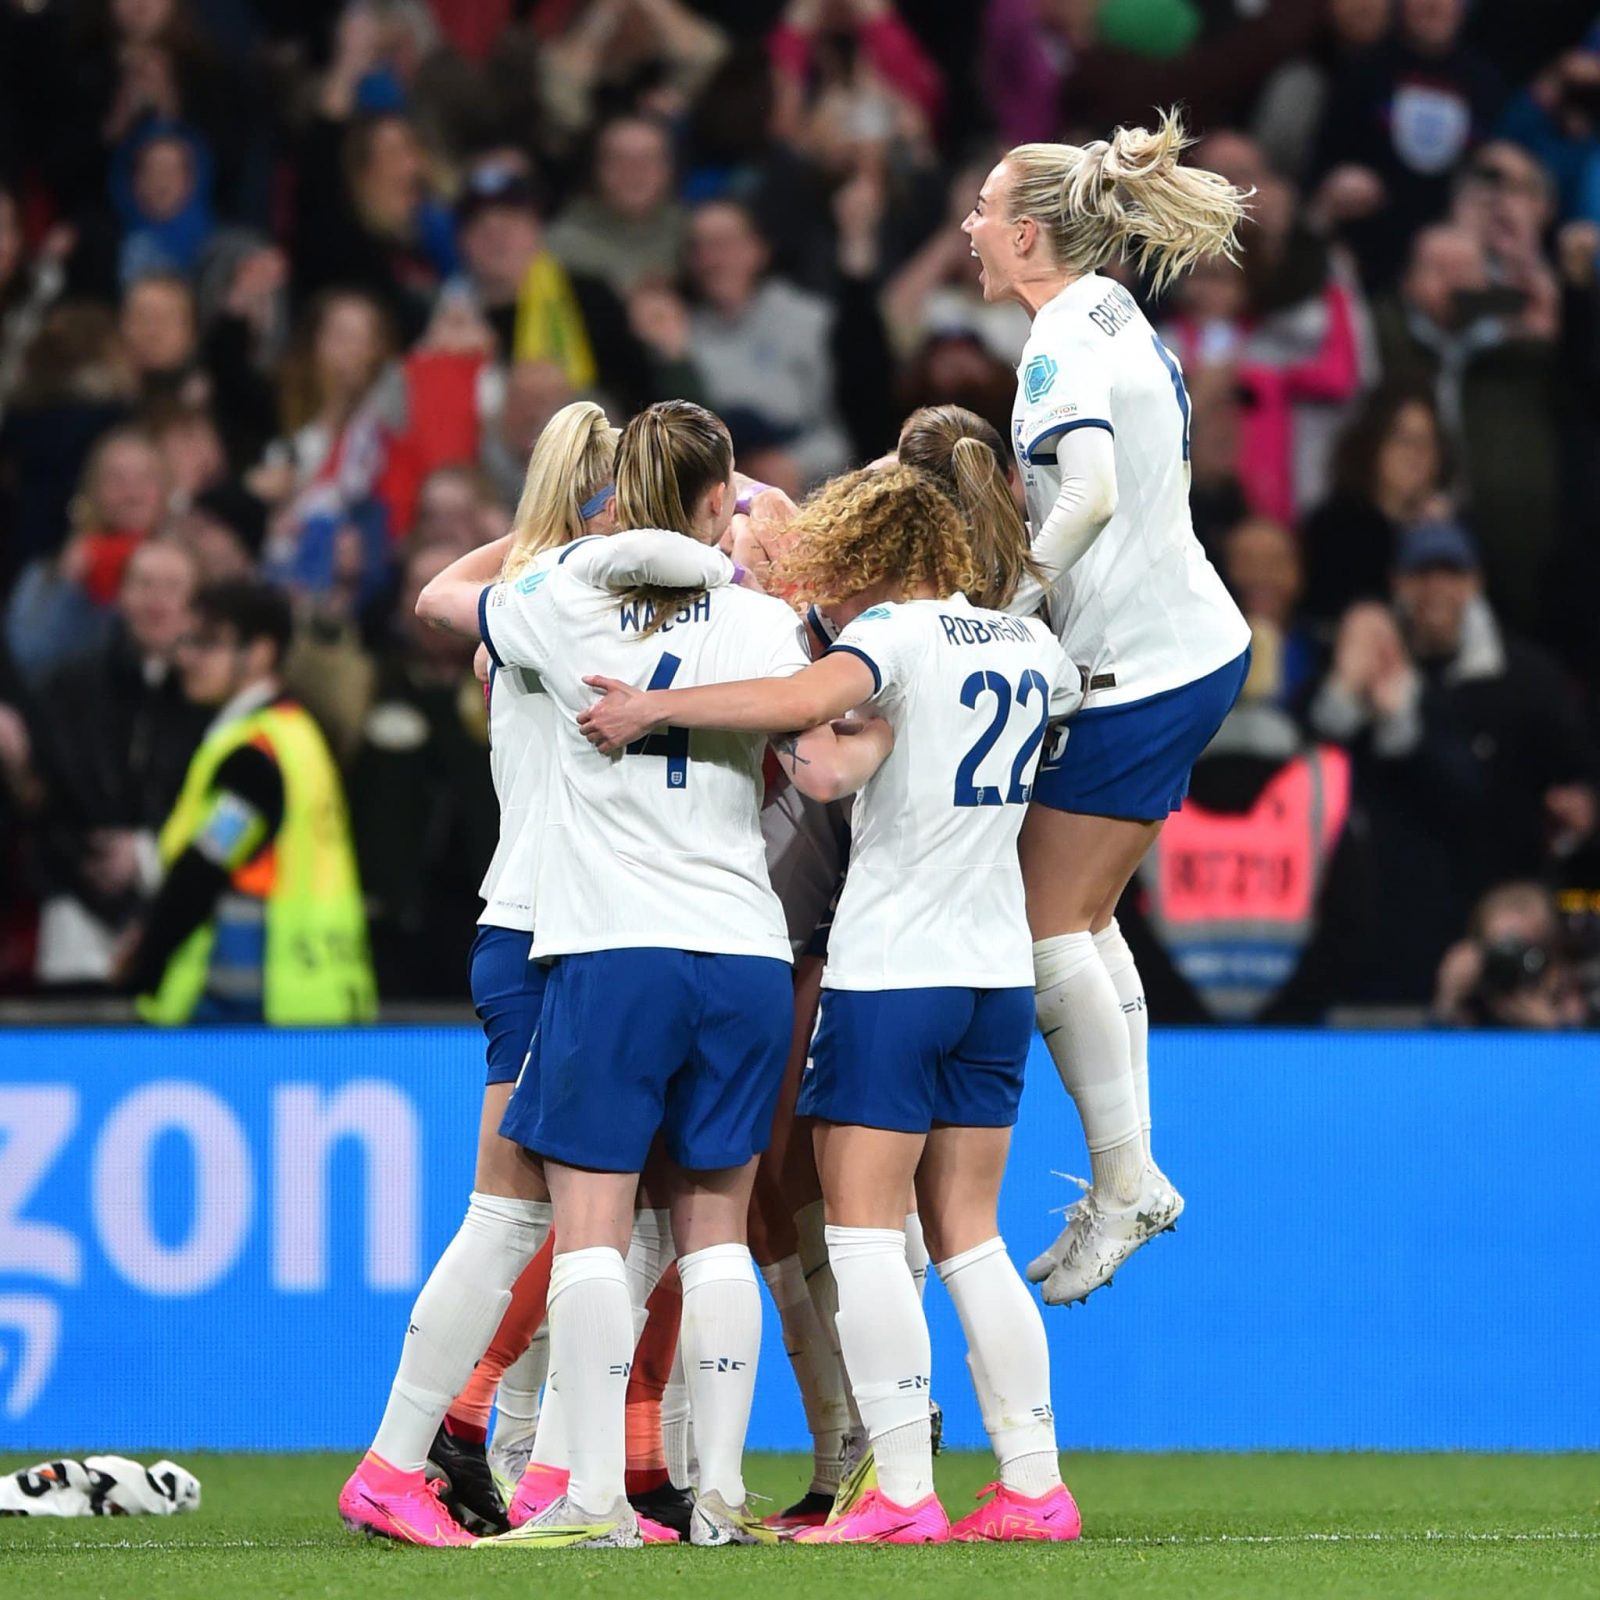 The England women's football team hugging on the pitch. 